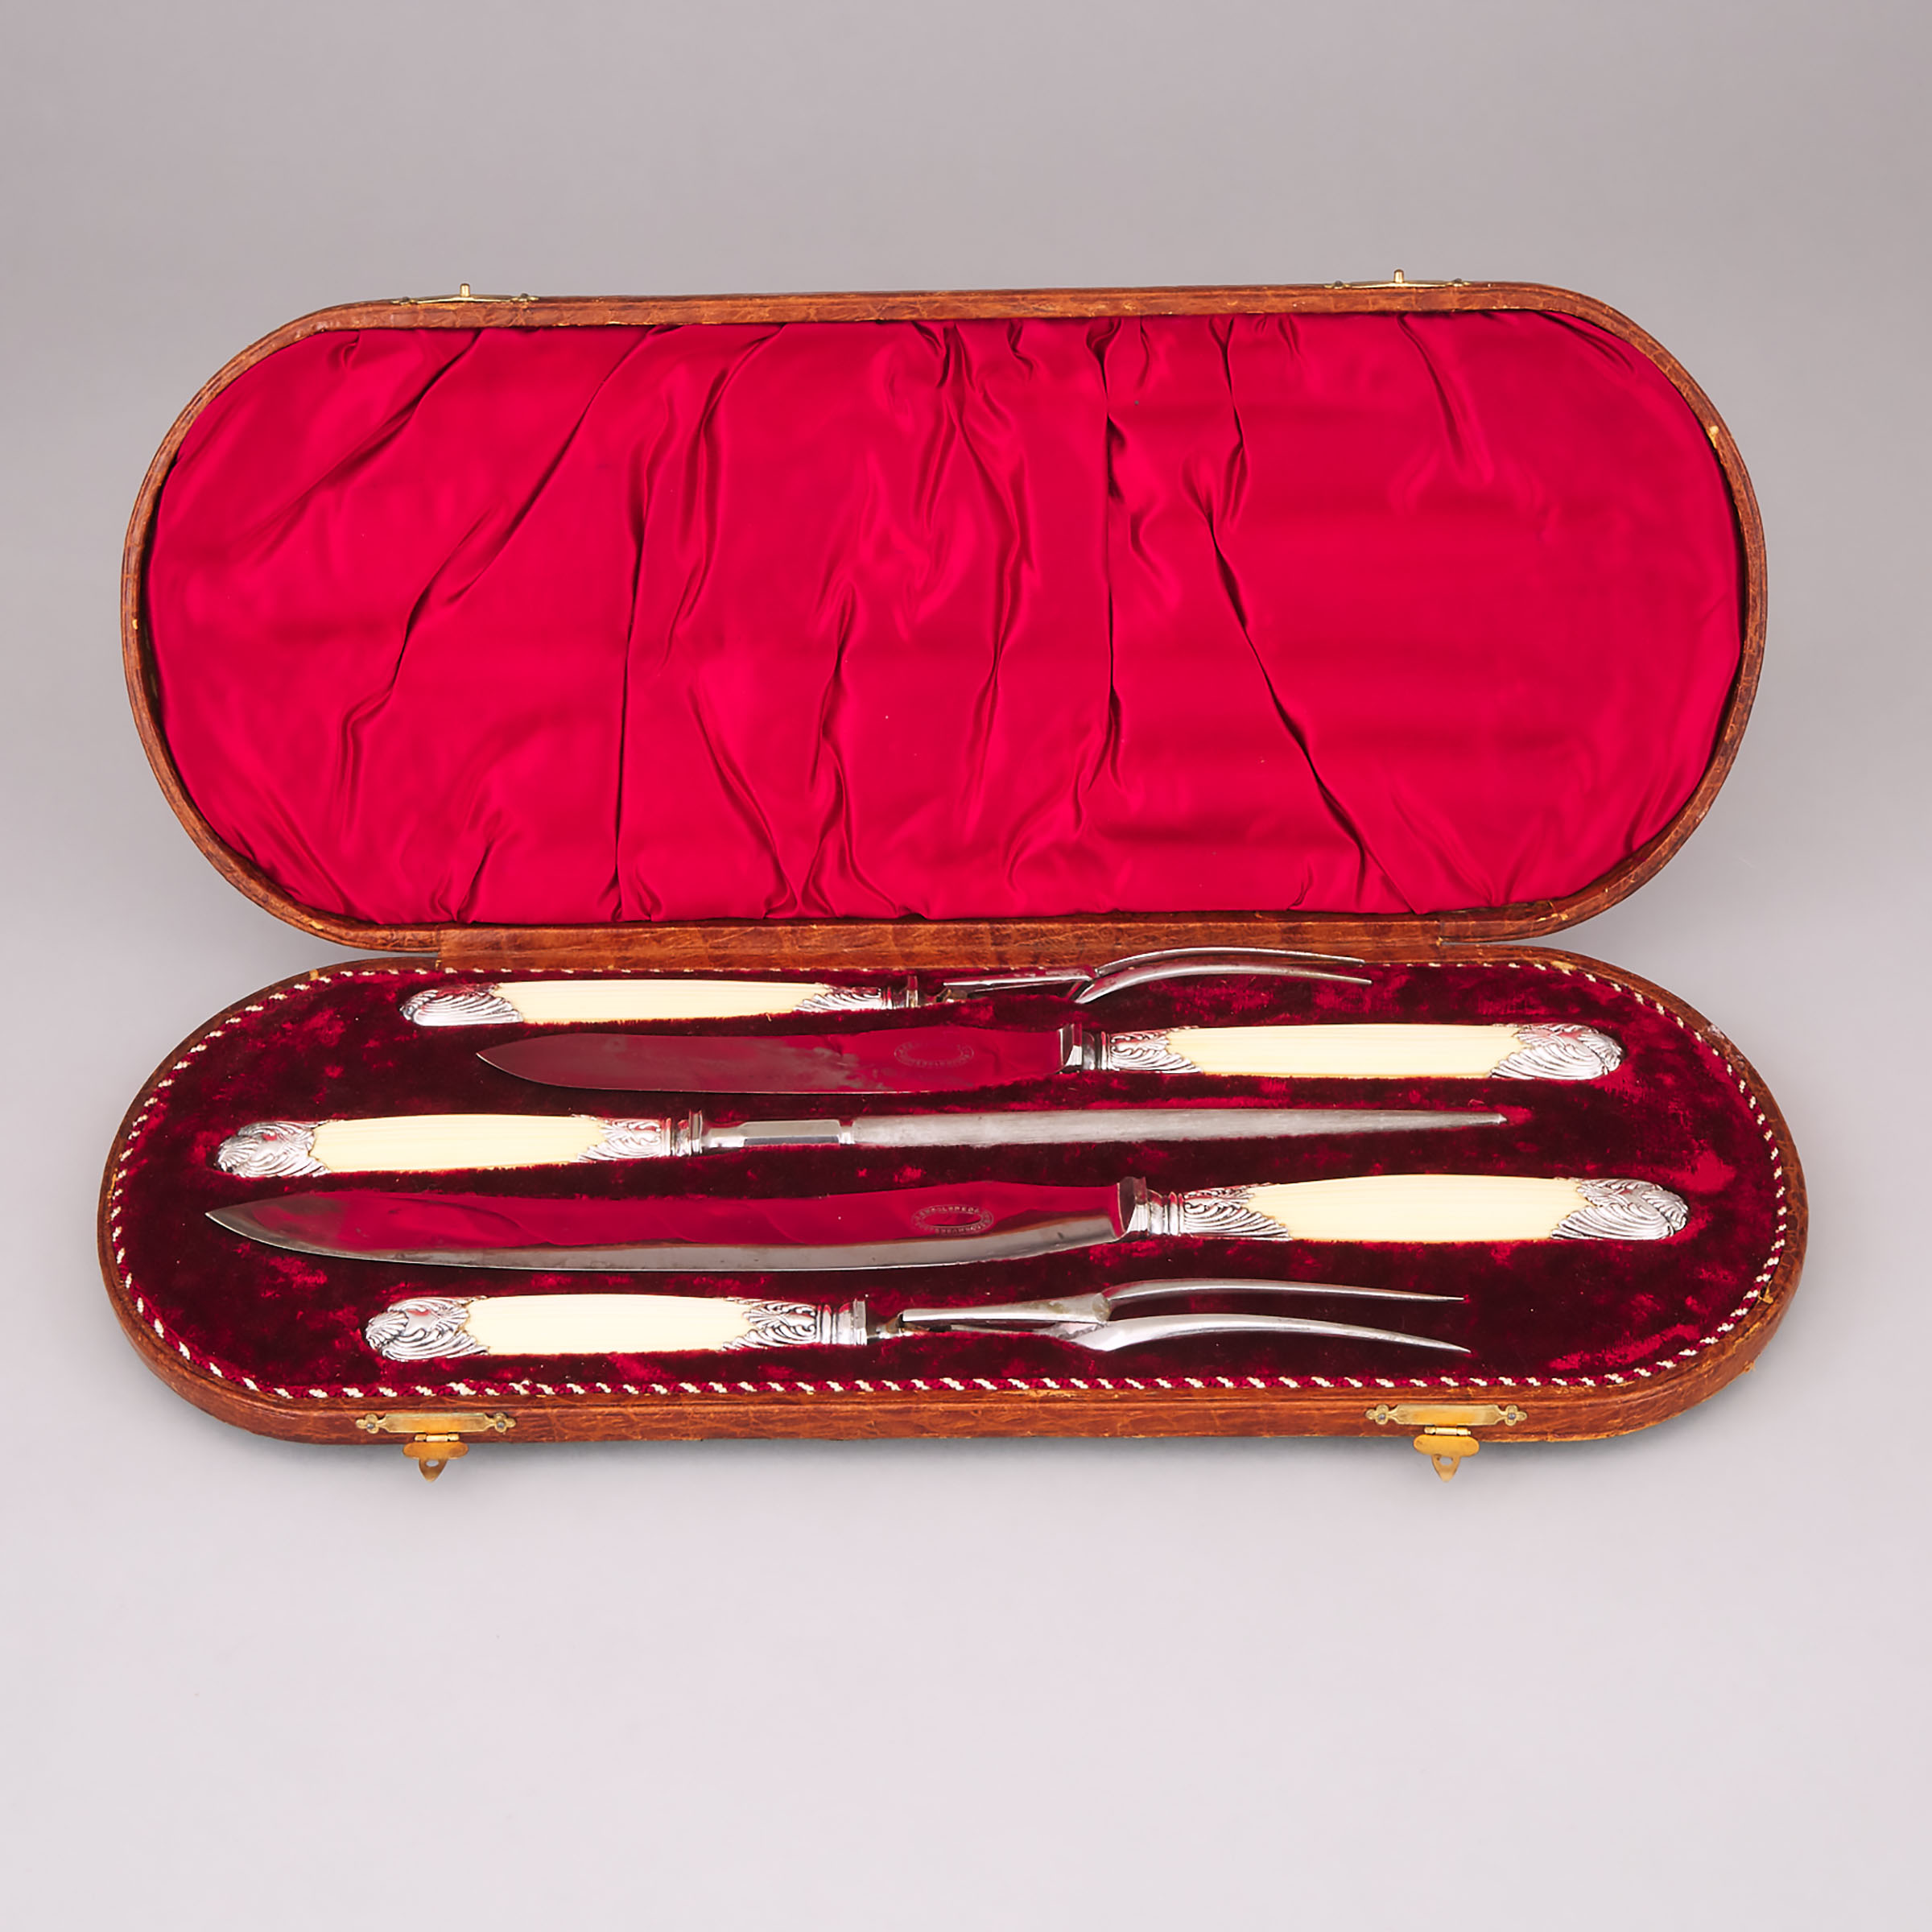 Victorian Silver Plate and Carved Ivory Handled Carving Set, late 19th century